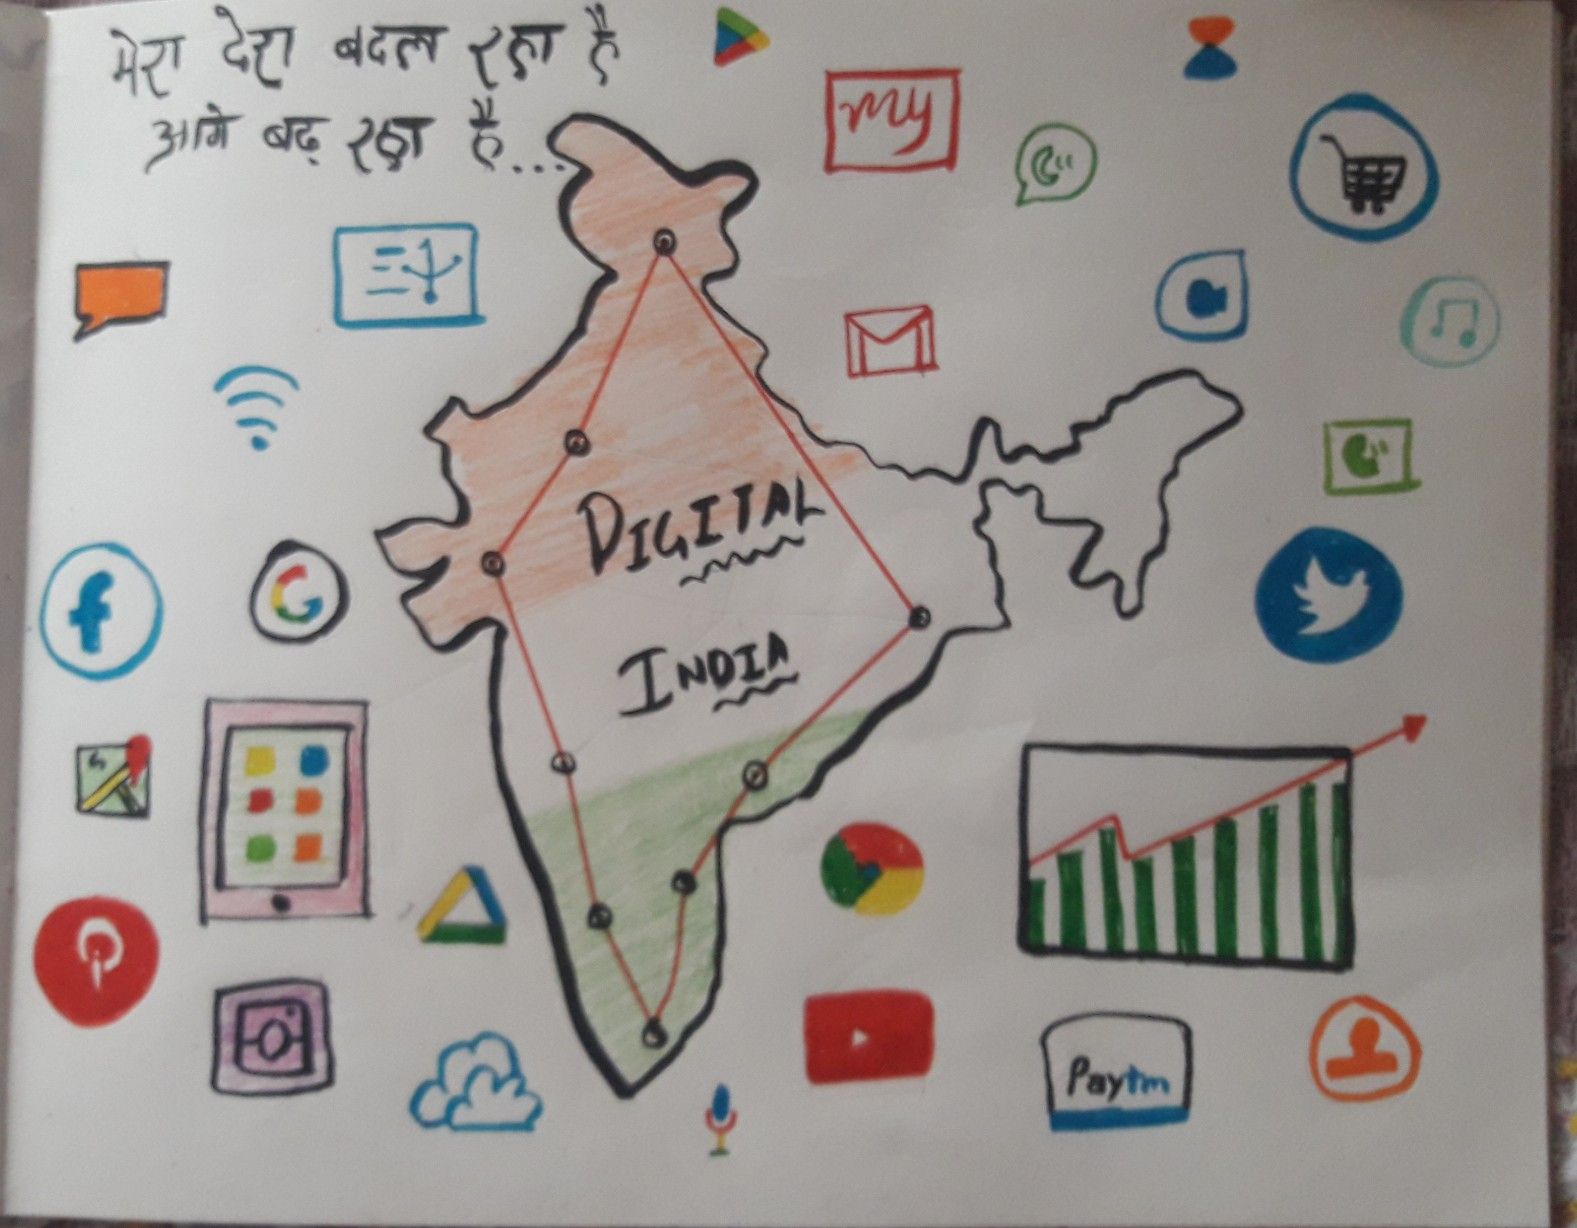 A poster on digital india | Digital india posters, India poster